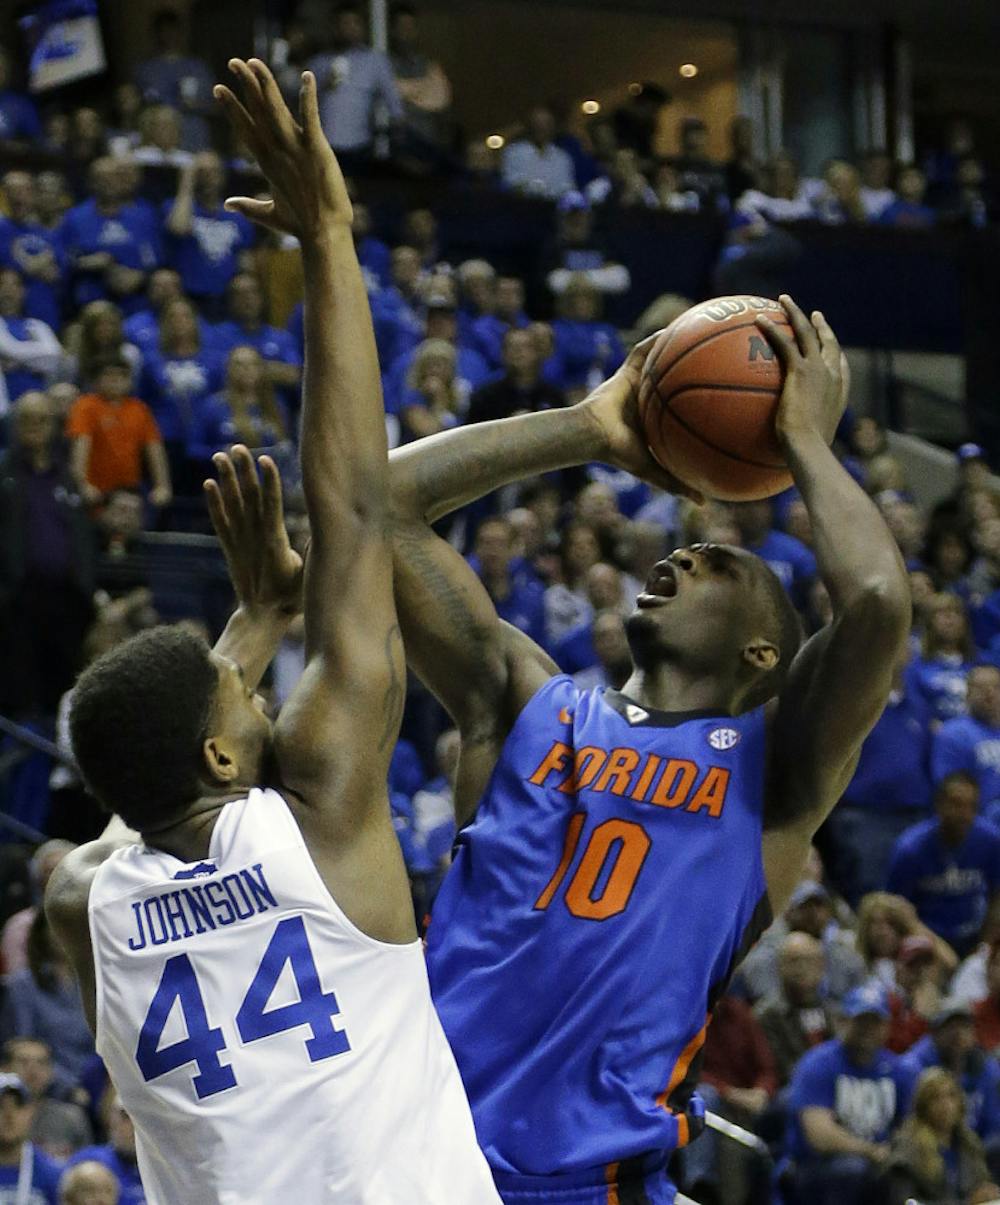 <p>Florida forward Dorian Finney-Smith (10) shoots against Kentucky center Dakari Johnson (44) during the second half of an NCAA college basketball game in the quarter final round of the Southeastern Conference tournament, Friday, March 13, 2015, in Nashville, Tenn.</p>